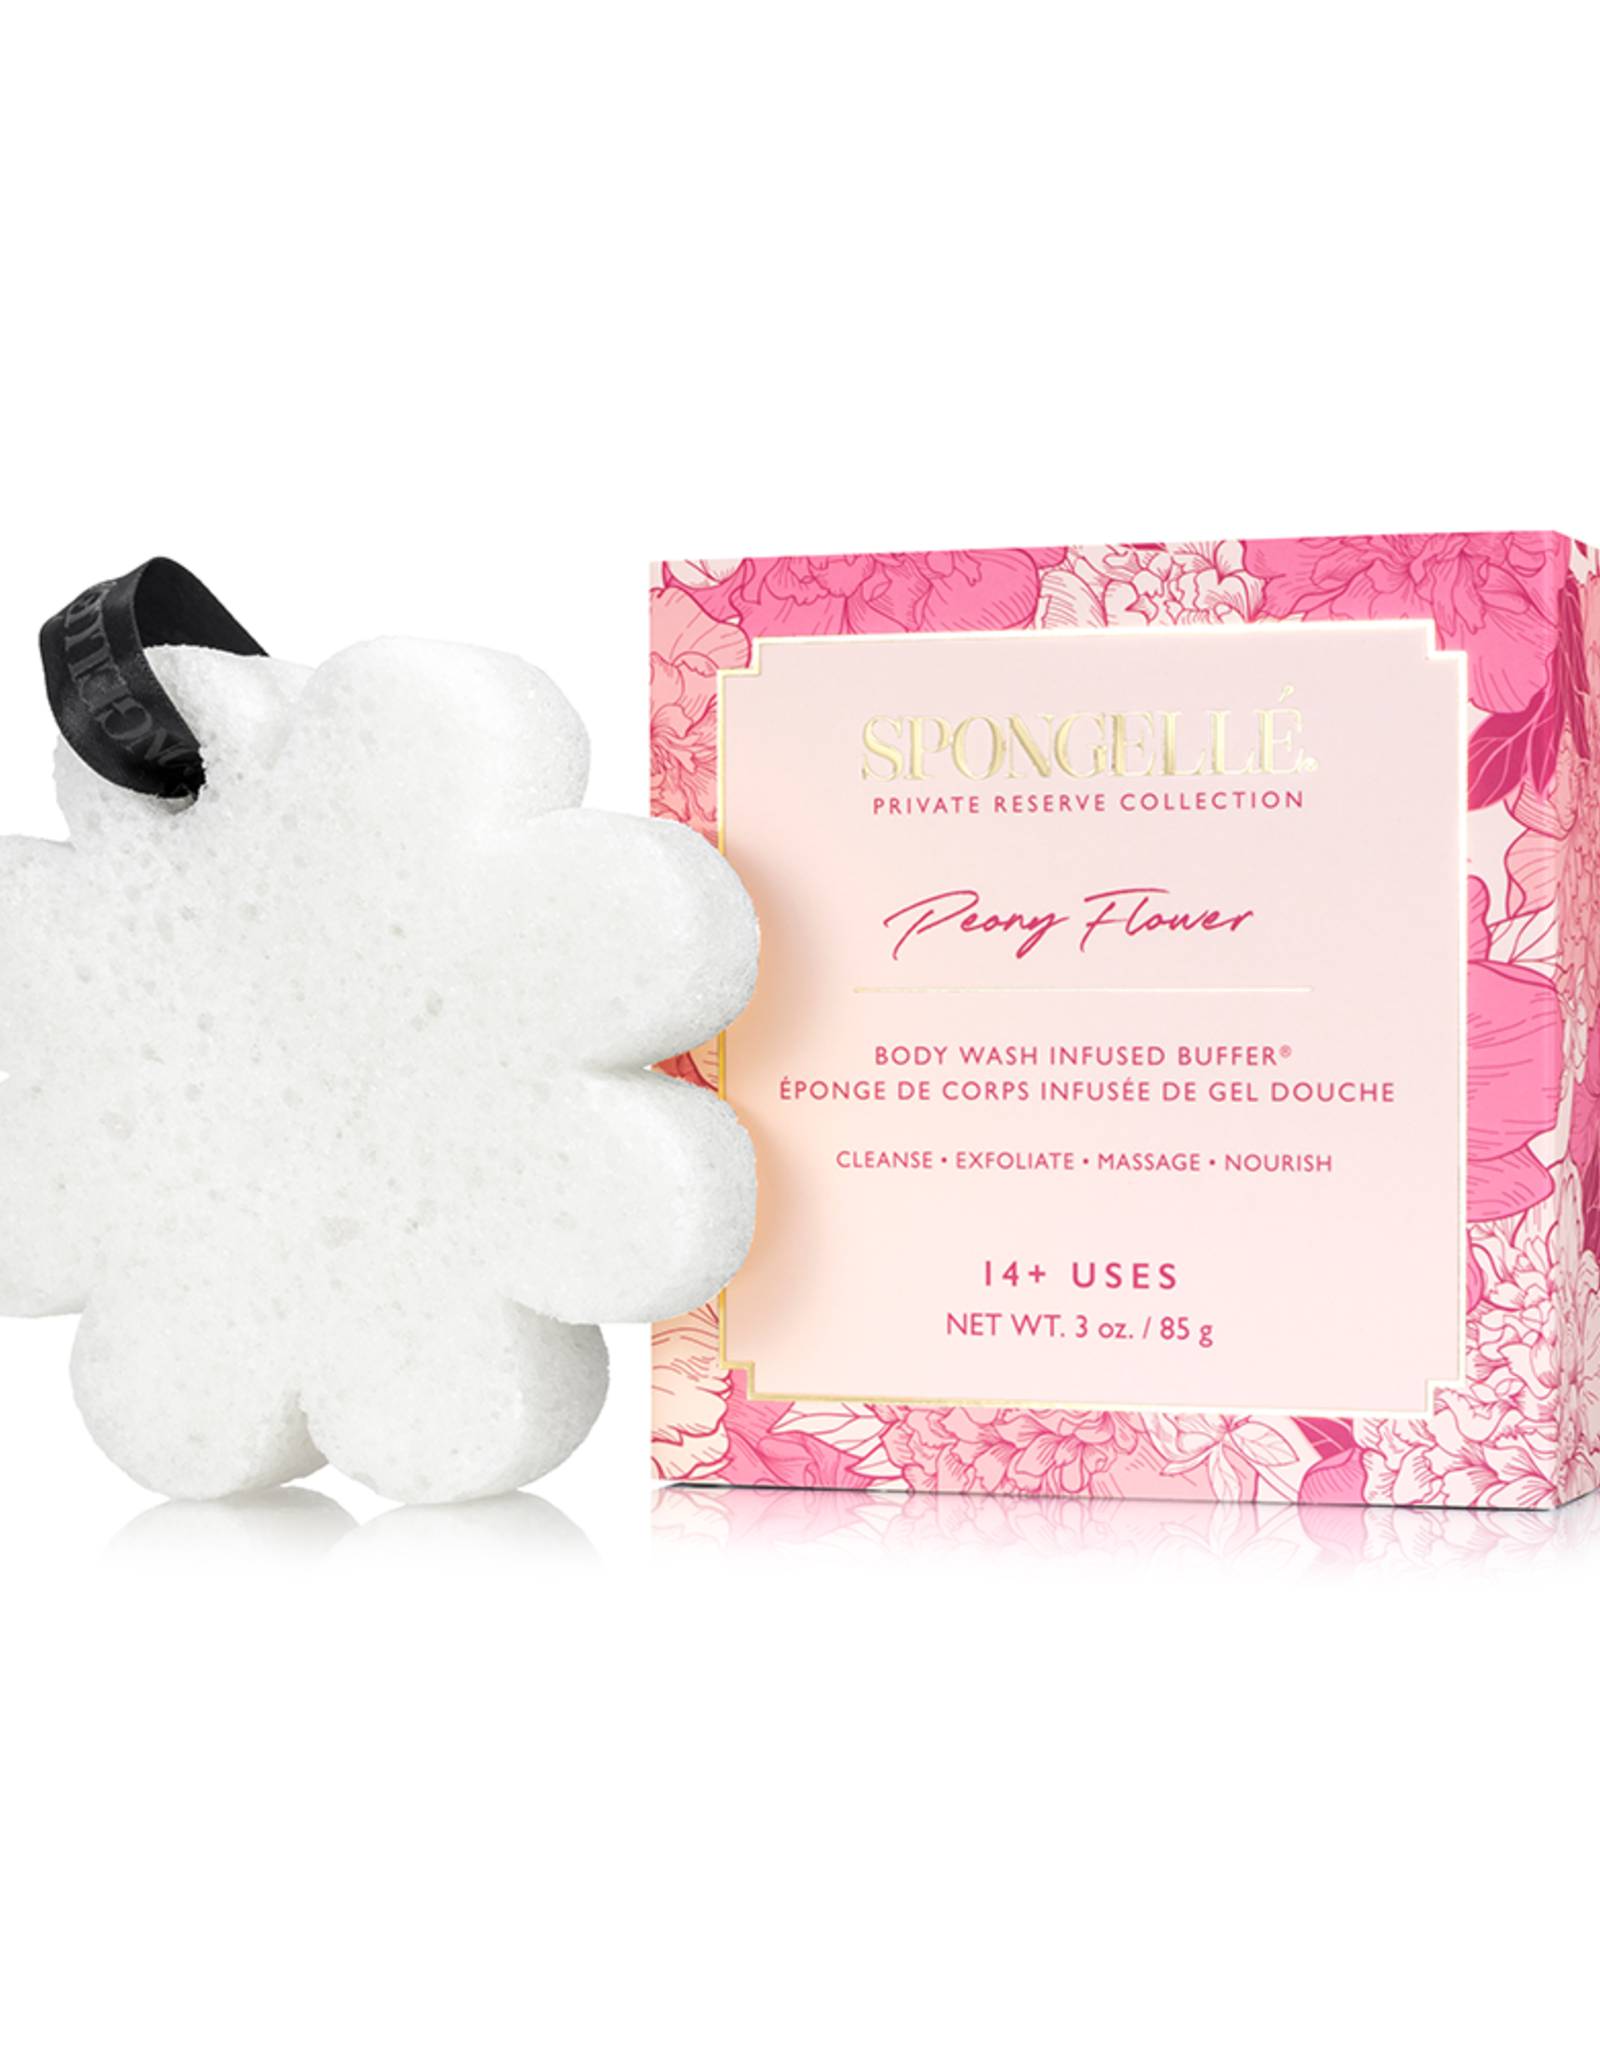 SPONGELLE PRIVATE RESERVE COLLECTION PEONY FLOWER 3 OZ